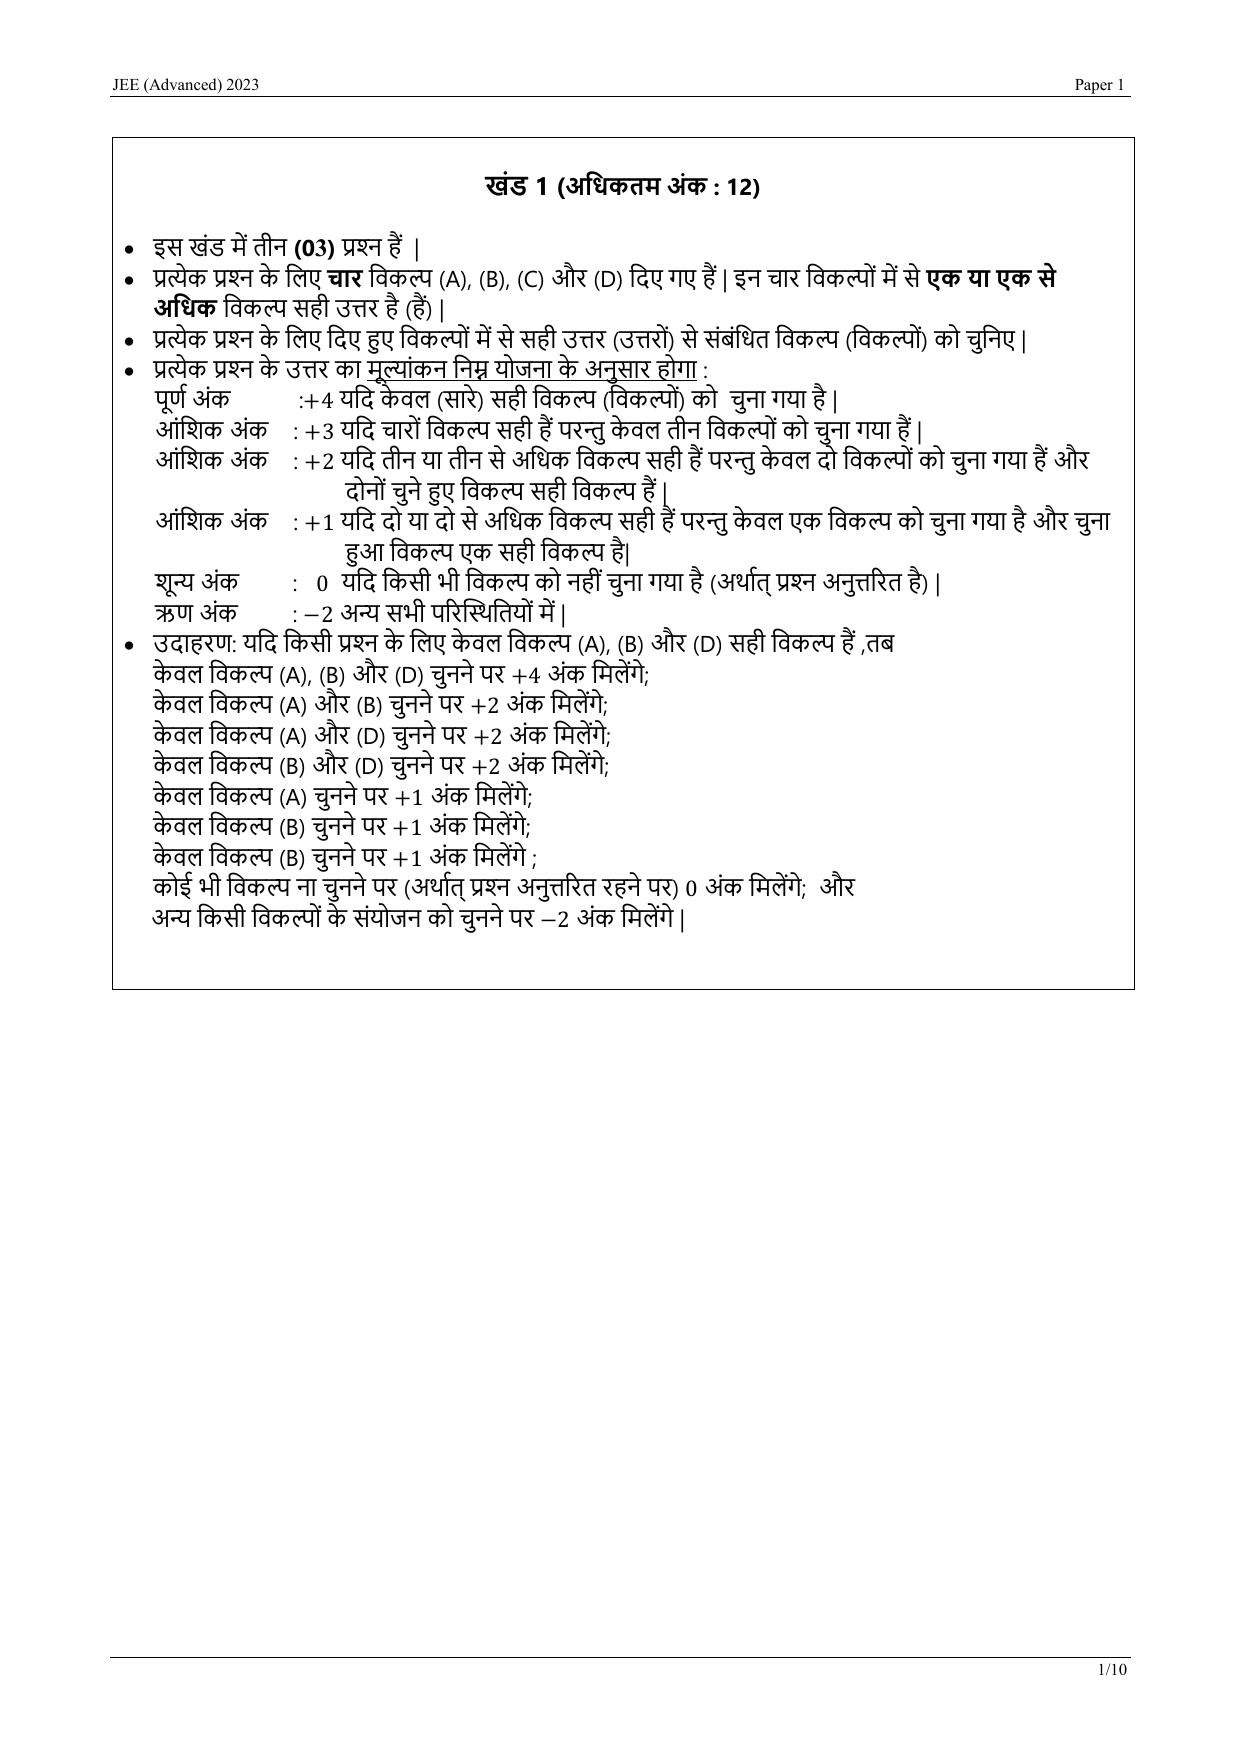 JEE Advanced 2023 Question Paper 1 (Hindi) - Page 11